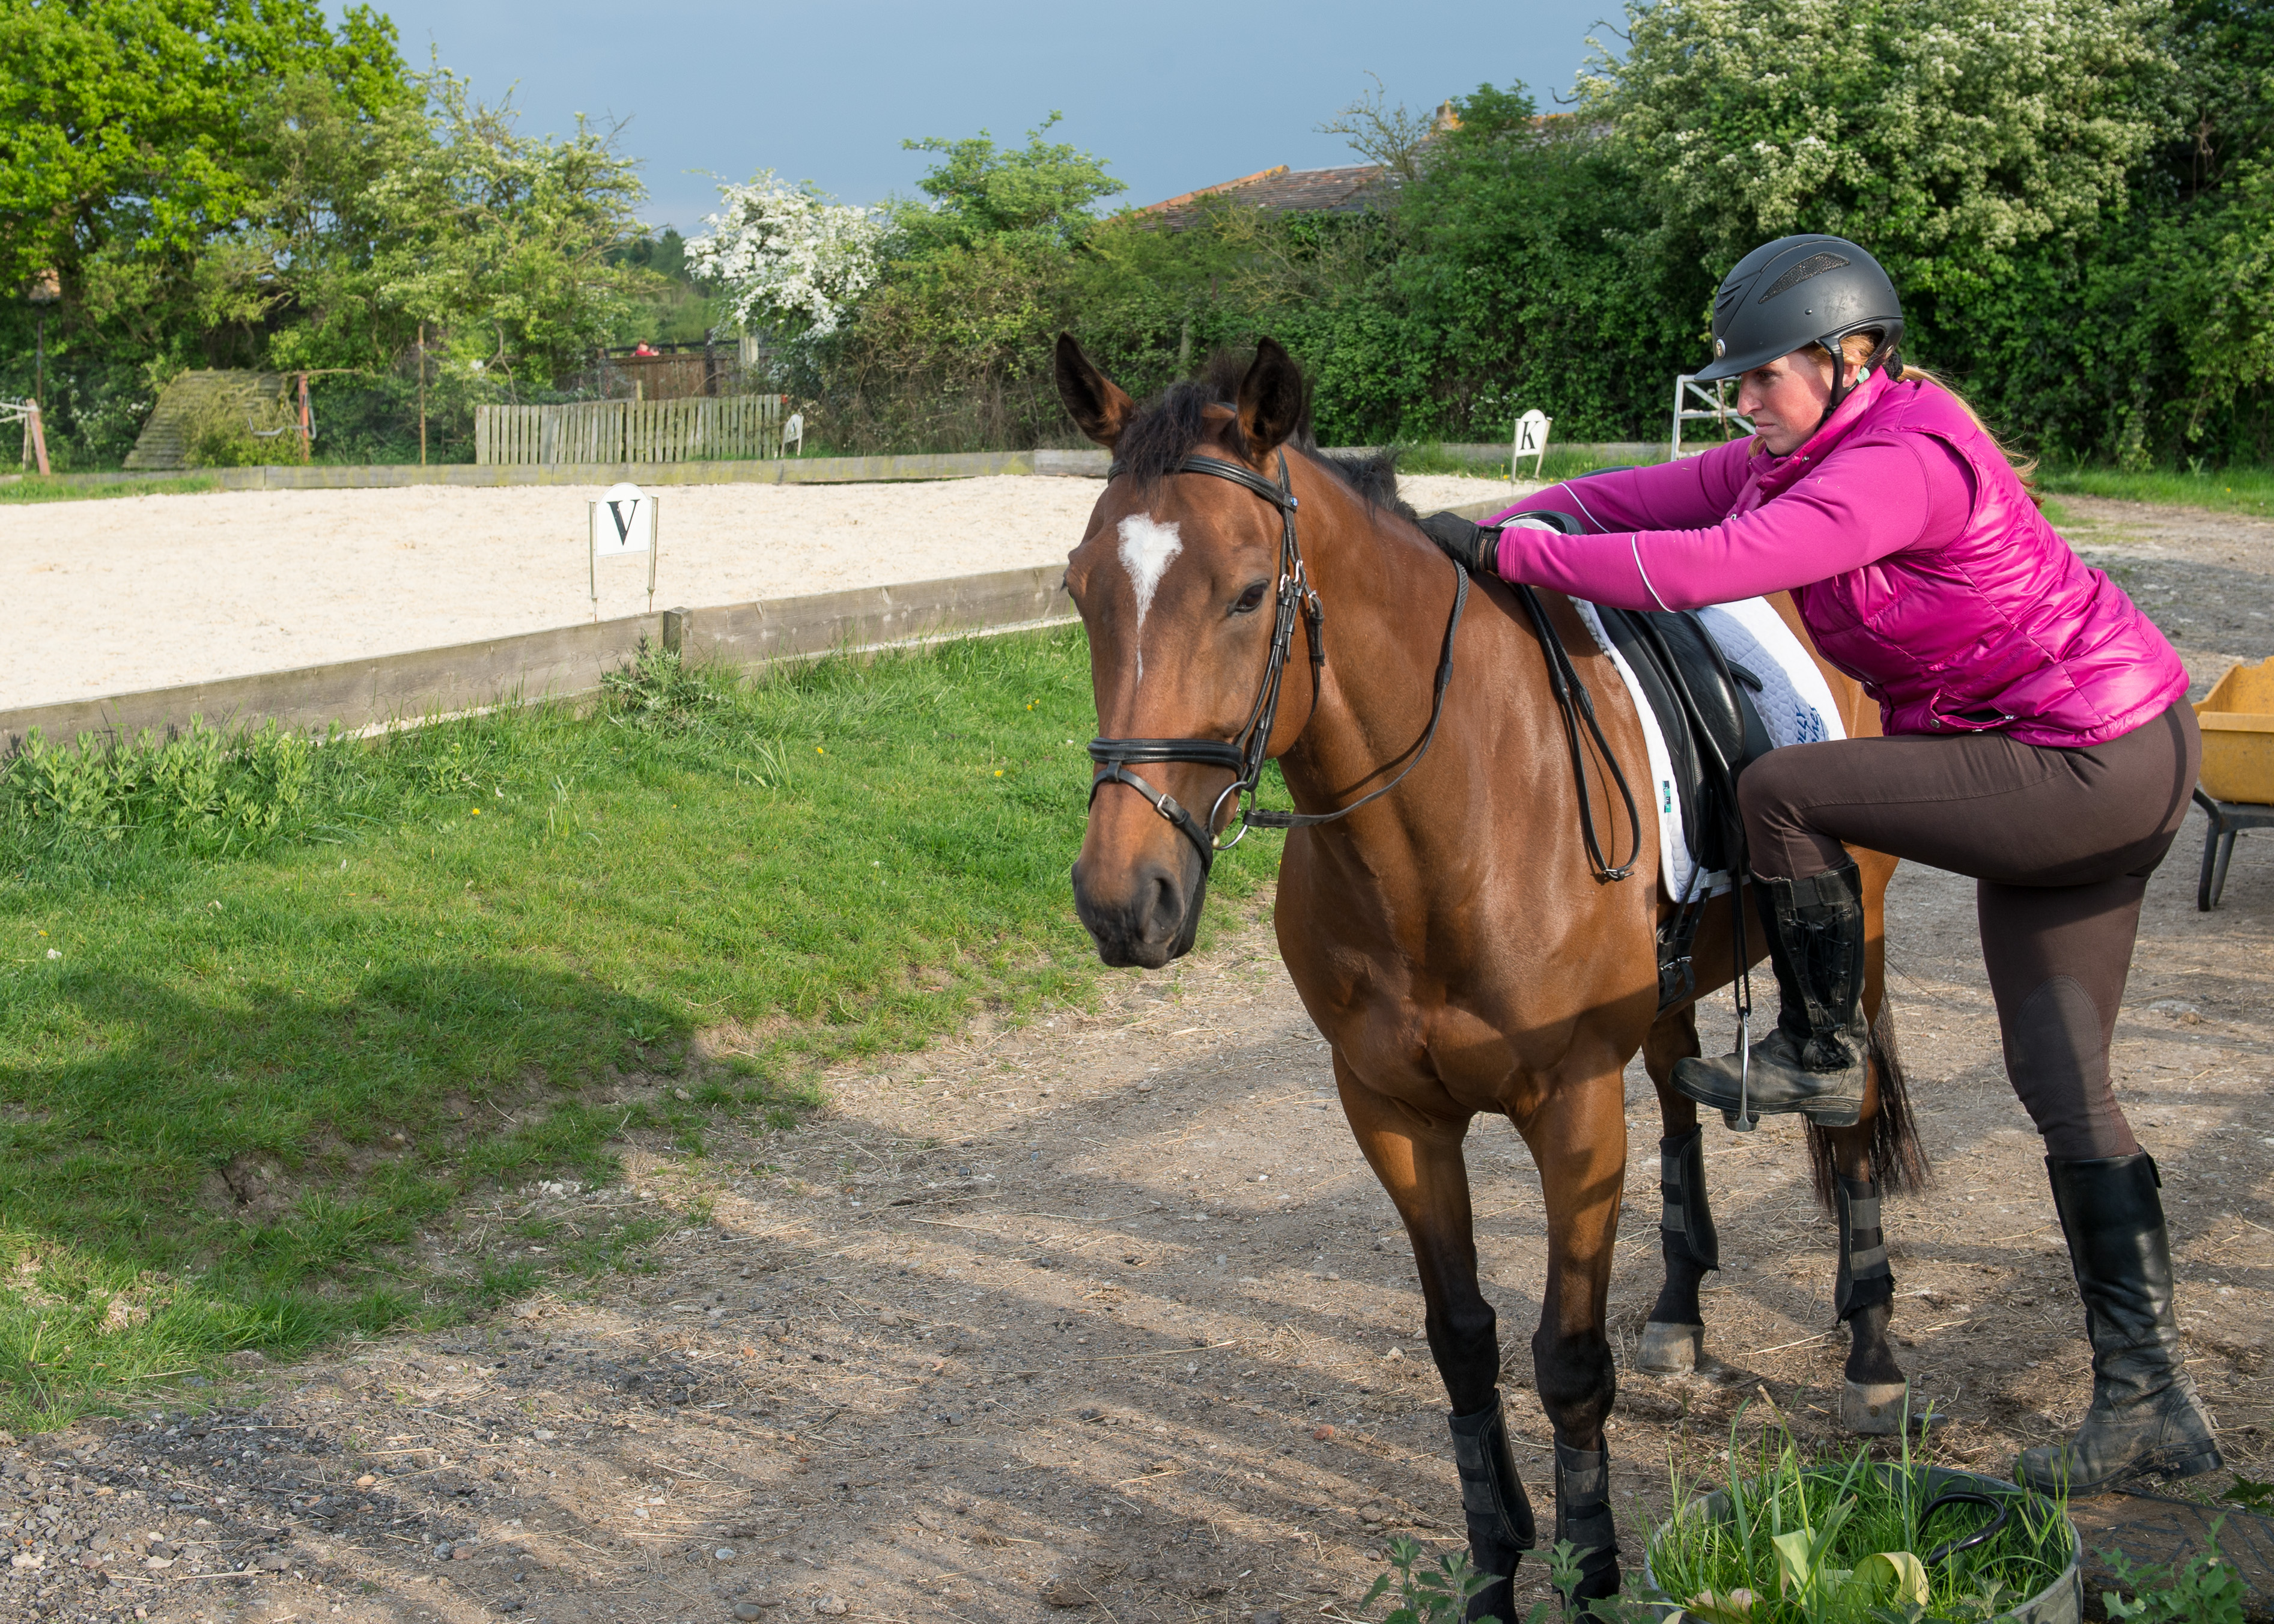 Mounting an ex-racehorse requires training to stand still